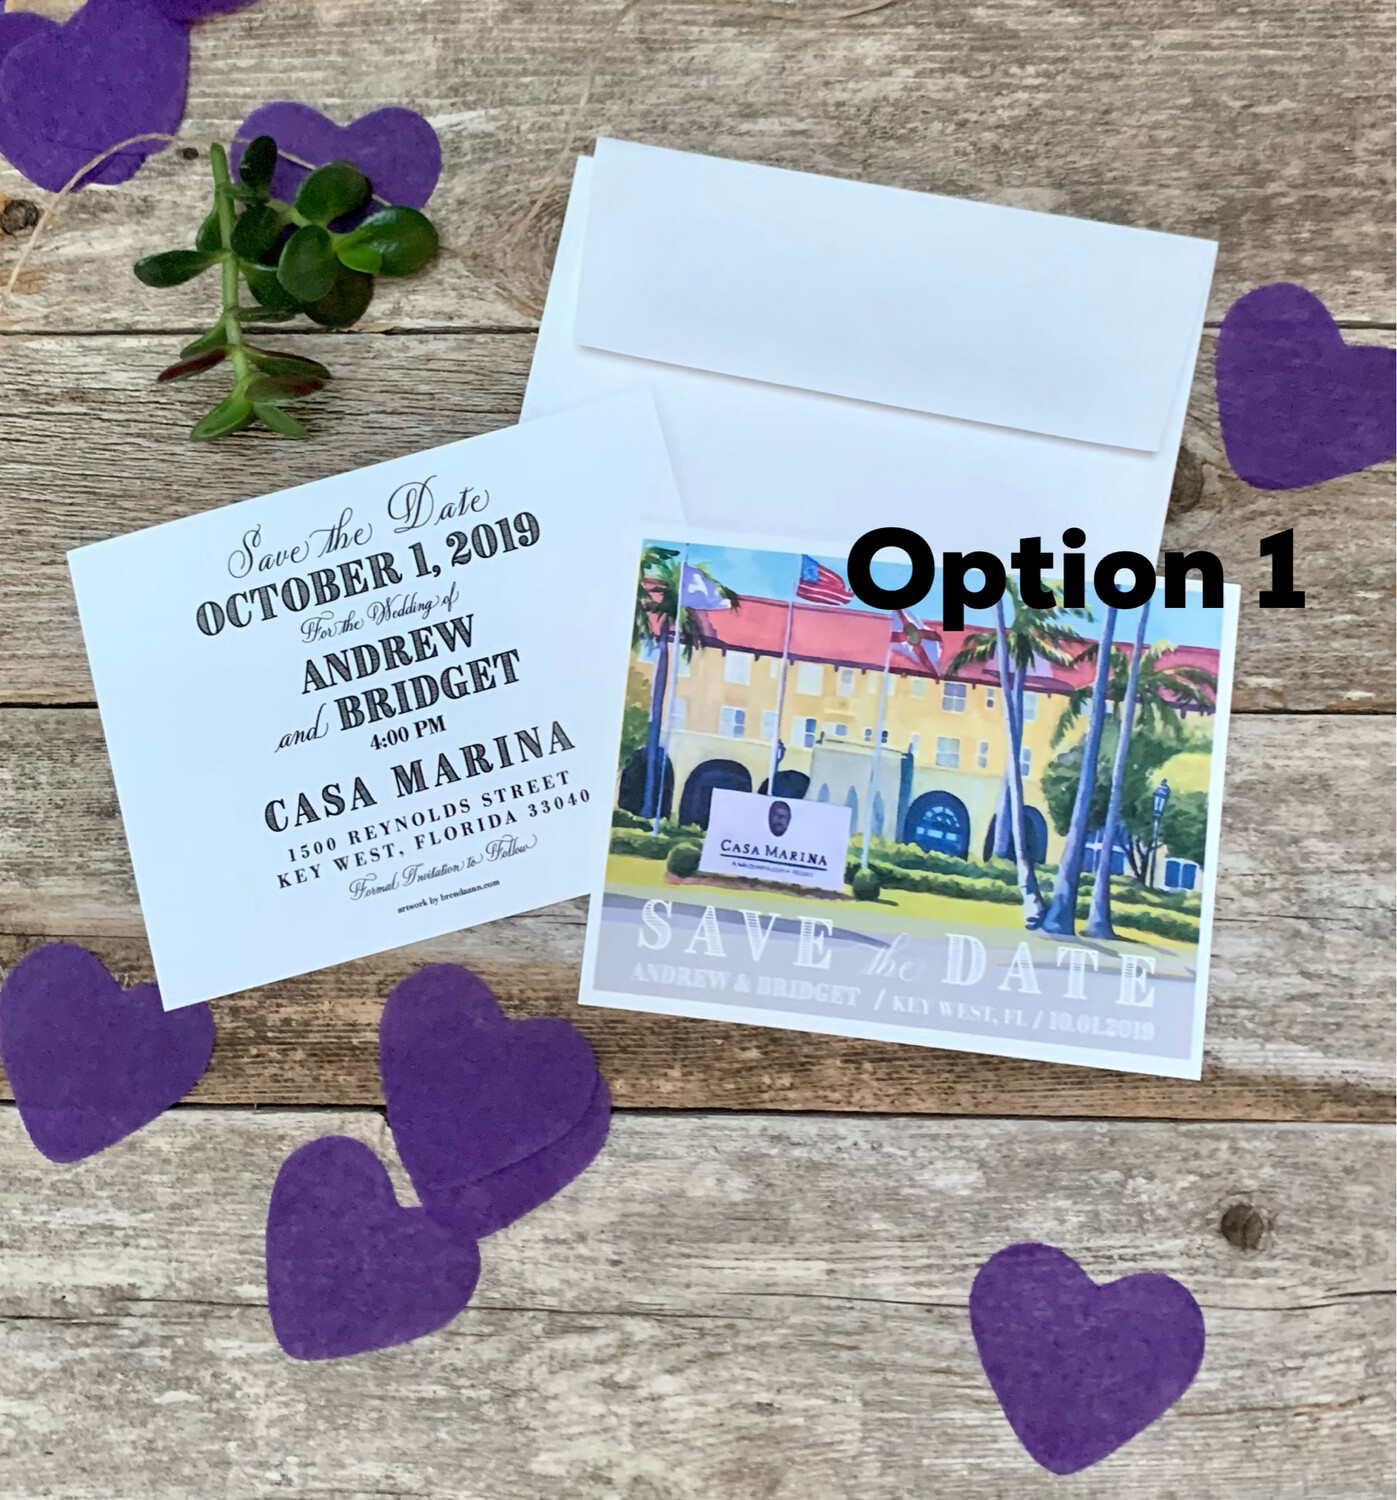 Casa Marina Key West Watercolor Wedding Save the Date Cards